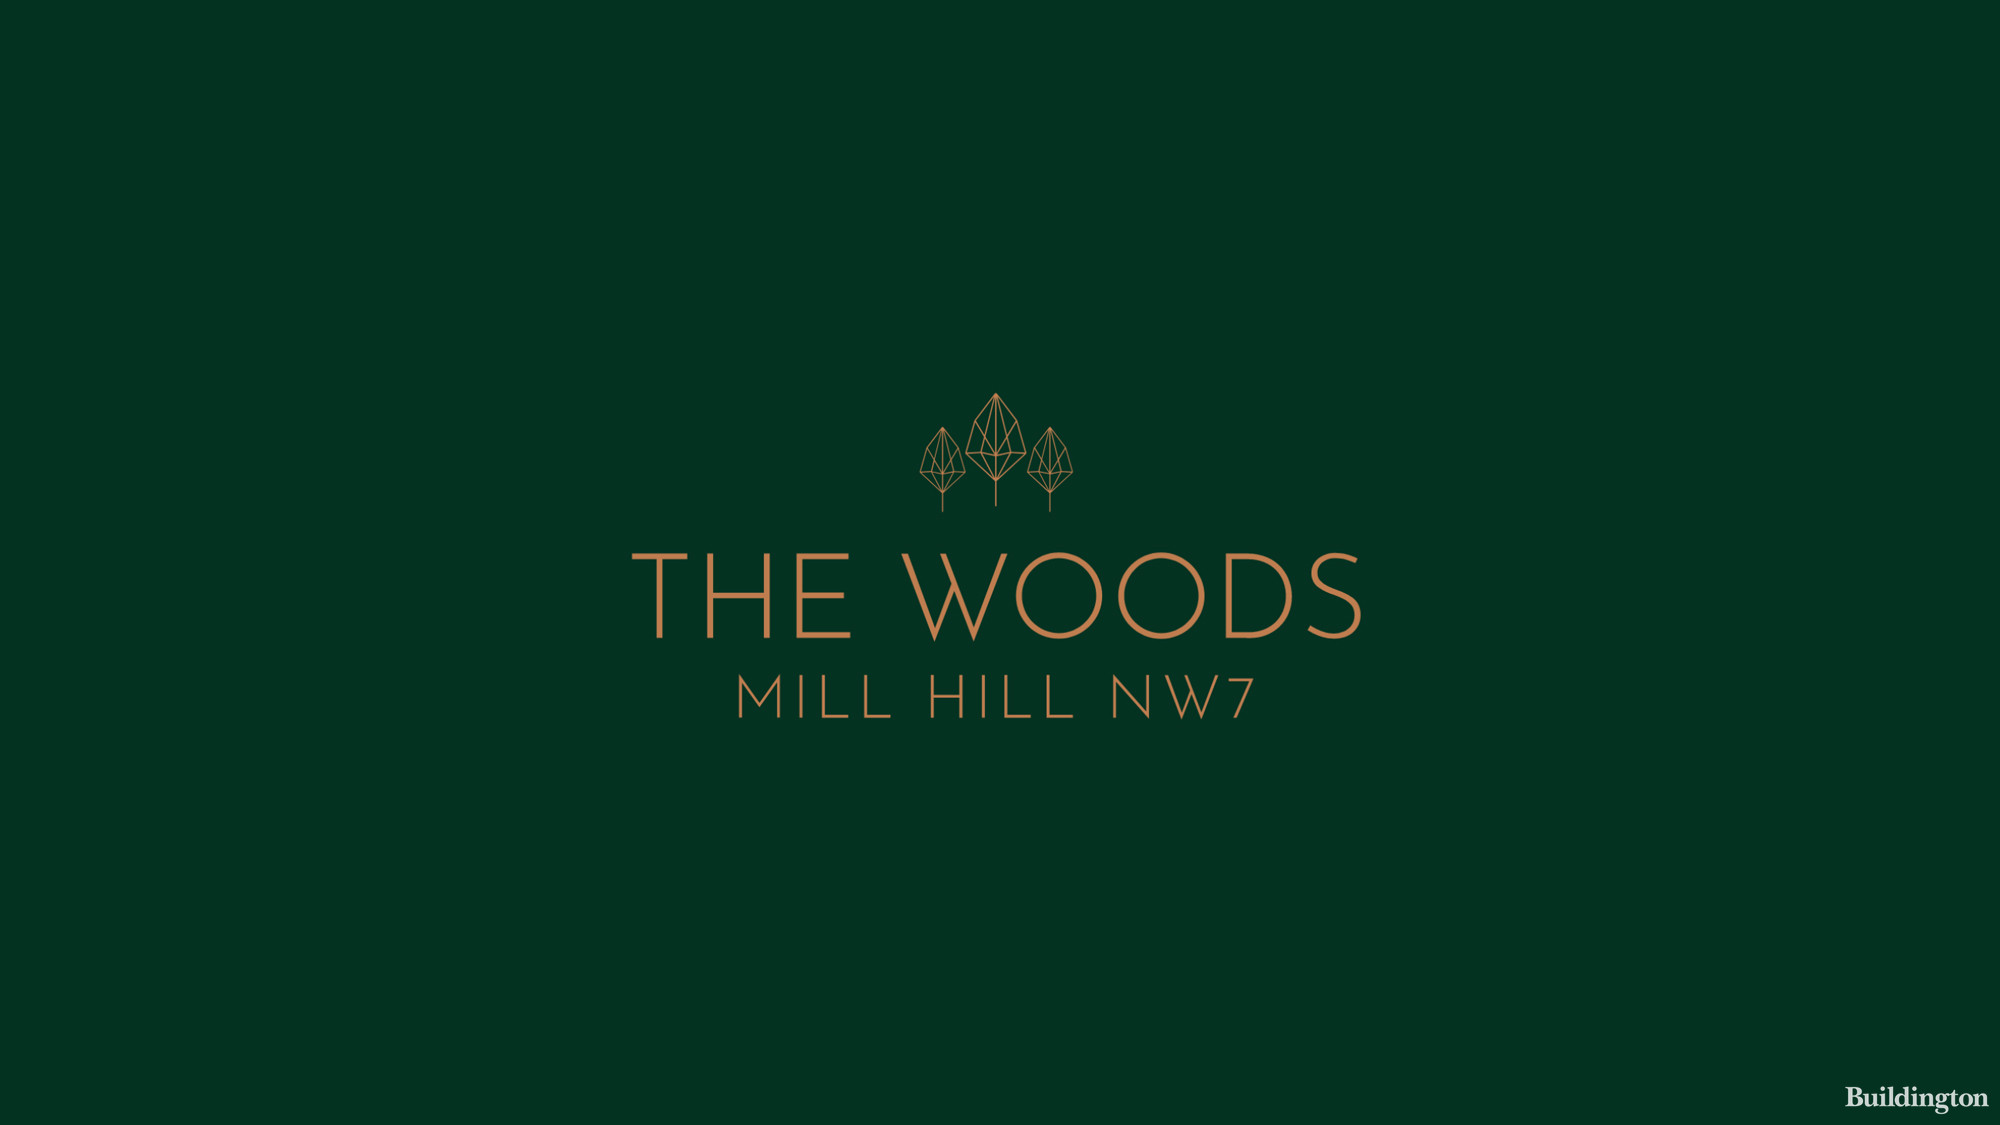 The Woods development by Burleigh Dell in Mill Hill, London NW7.